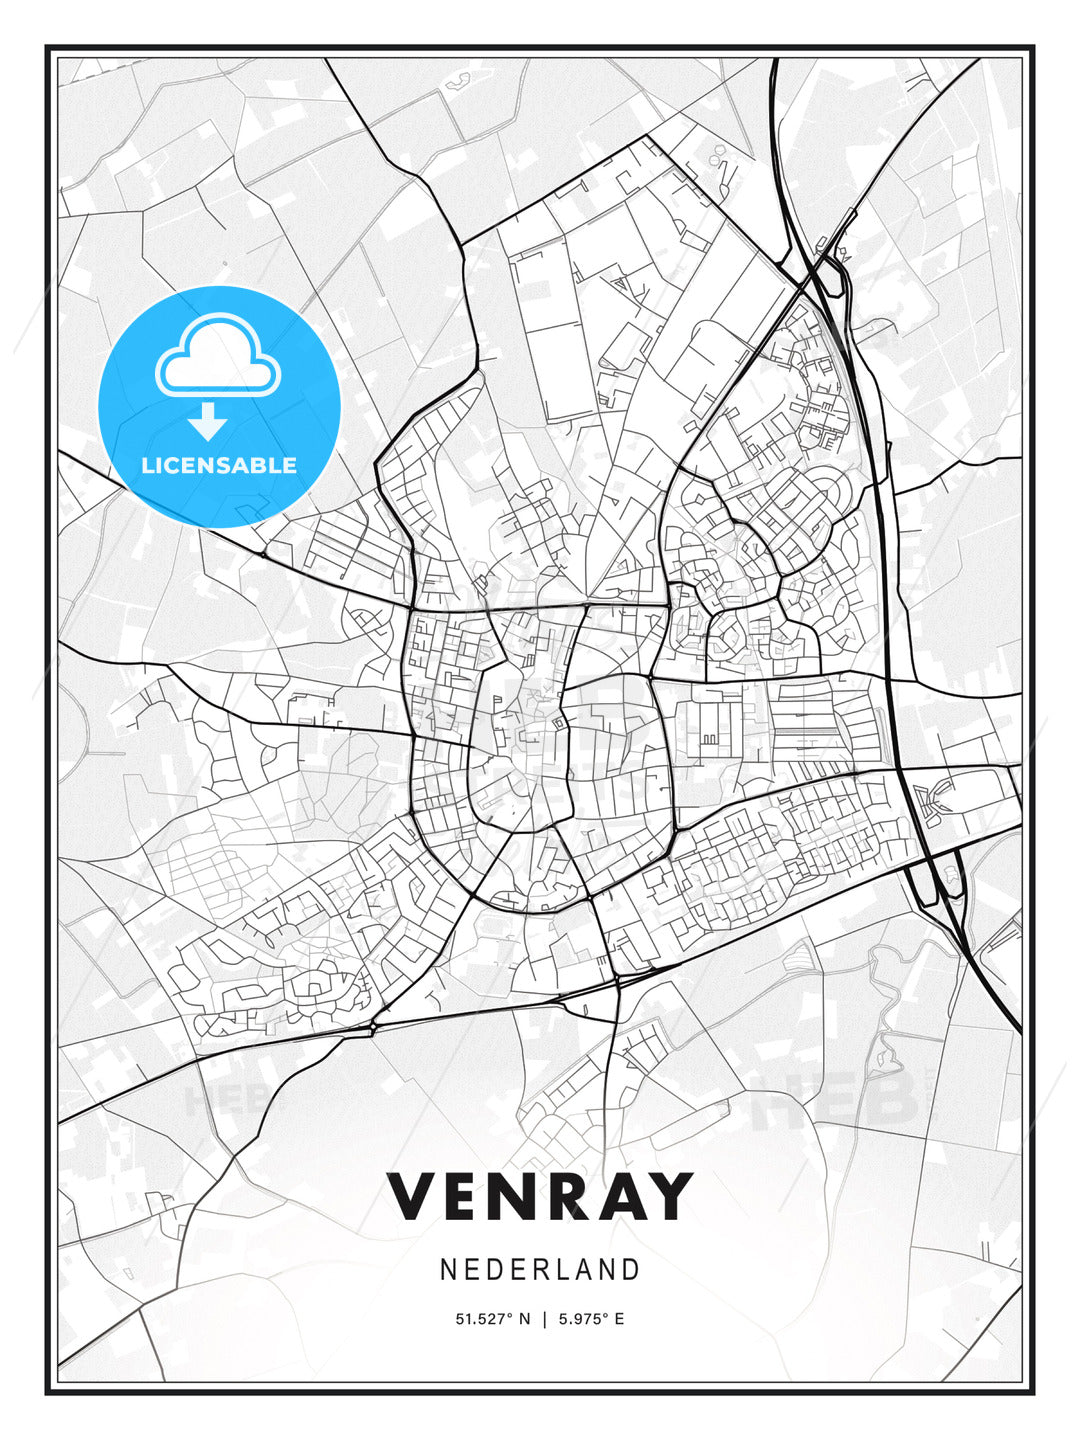 Venray, Netherlands, Modern Print Template in Various Formats - HEBSTREITS Sketches